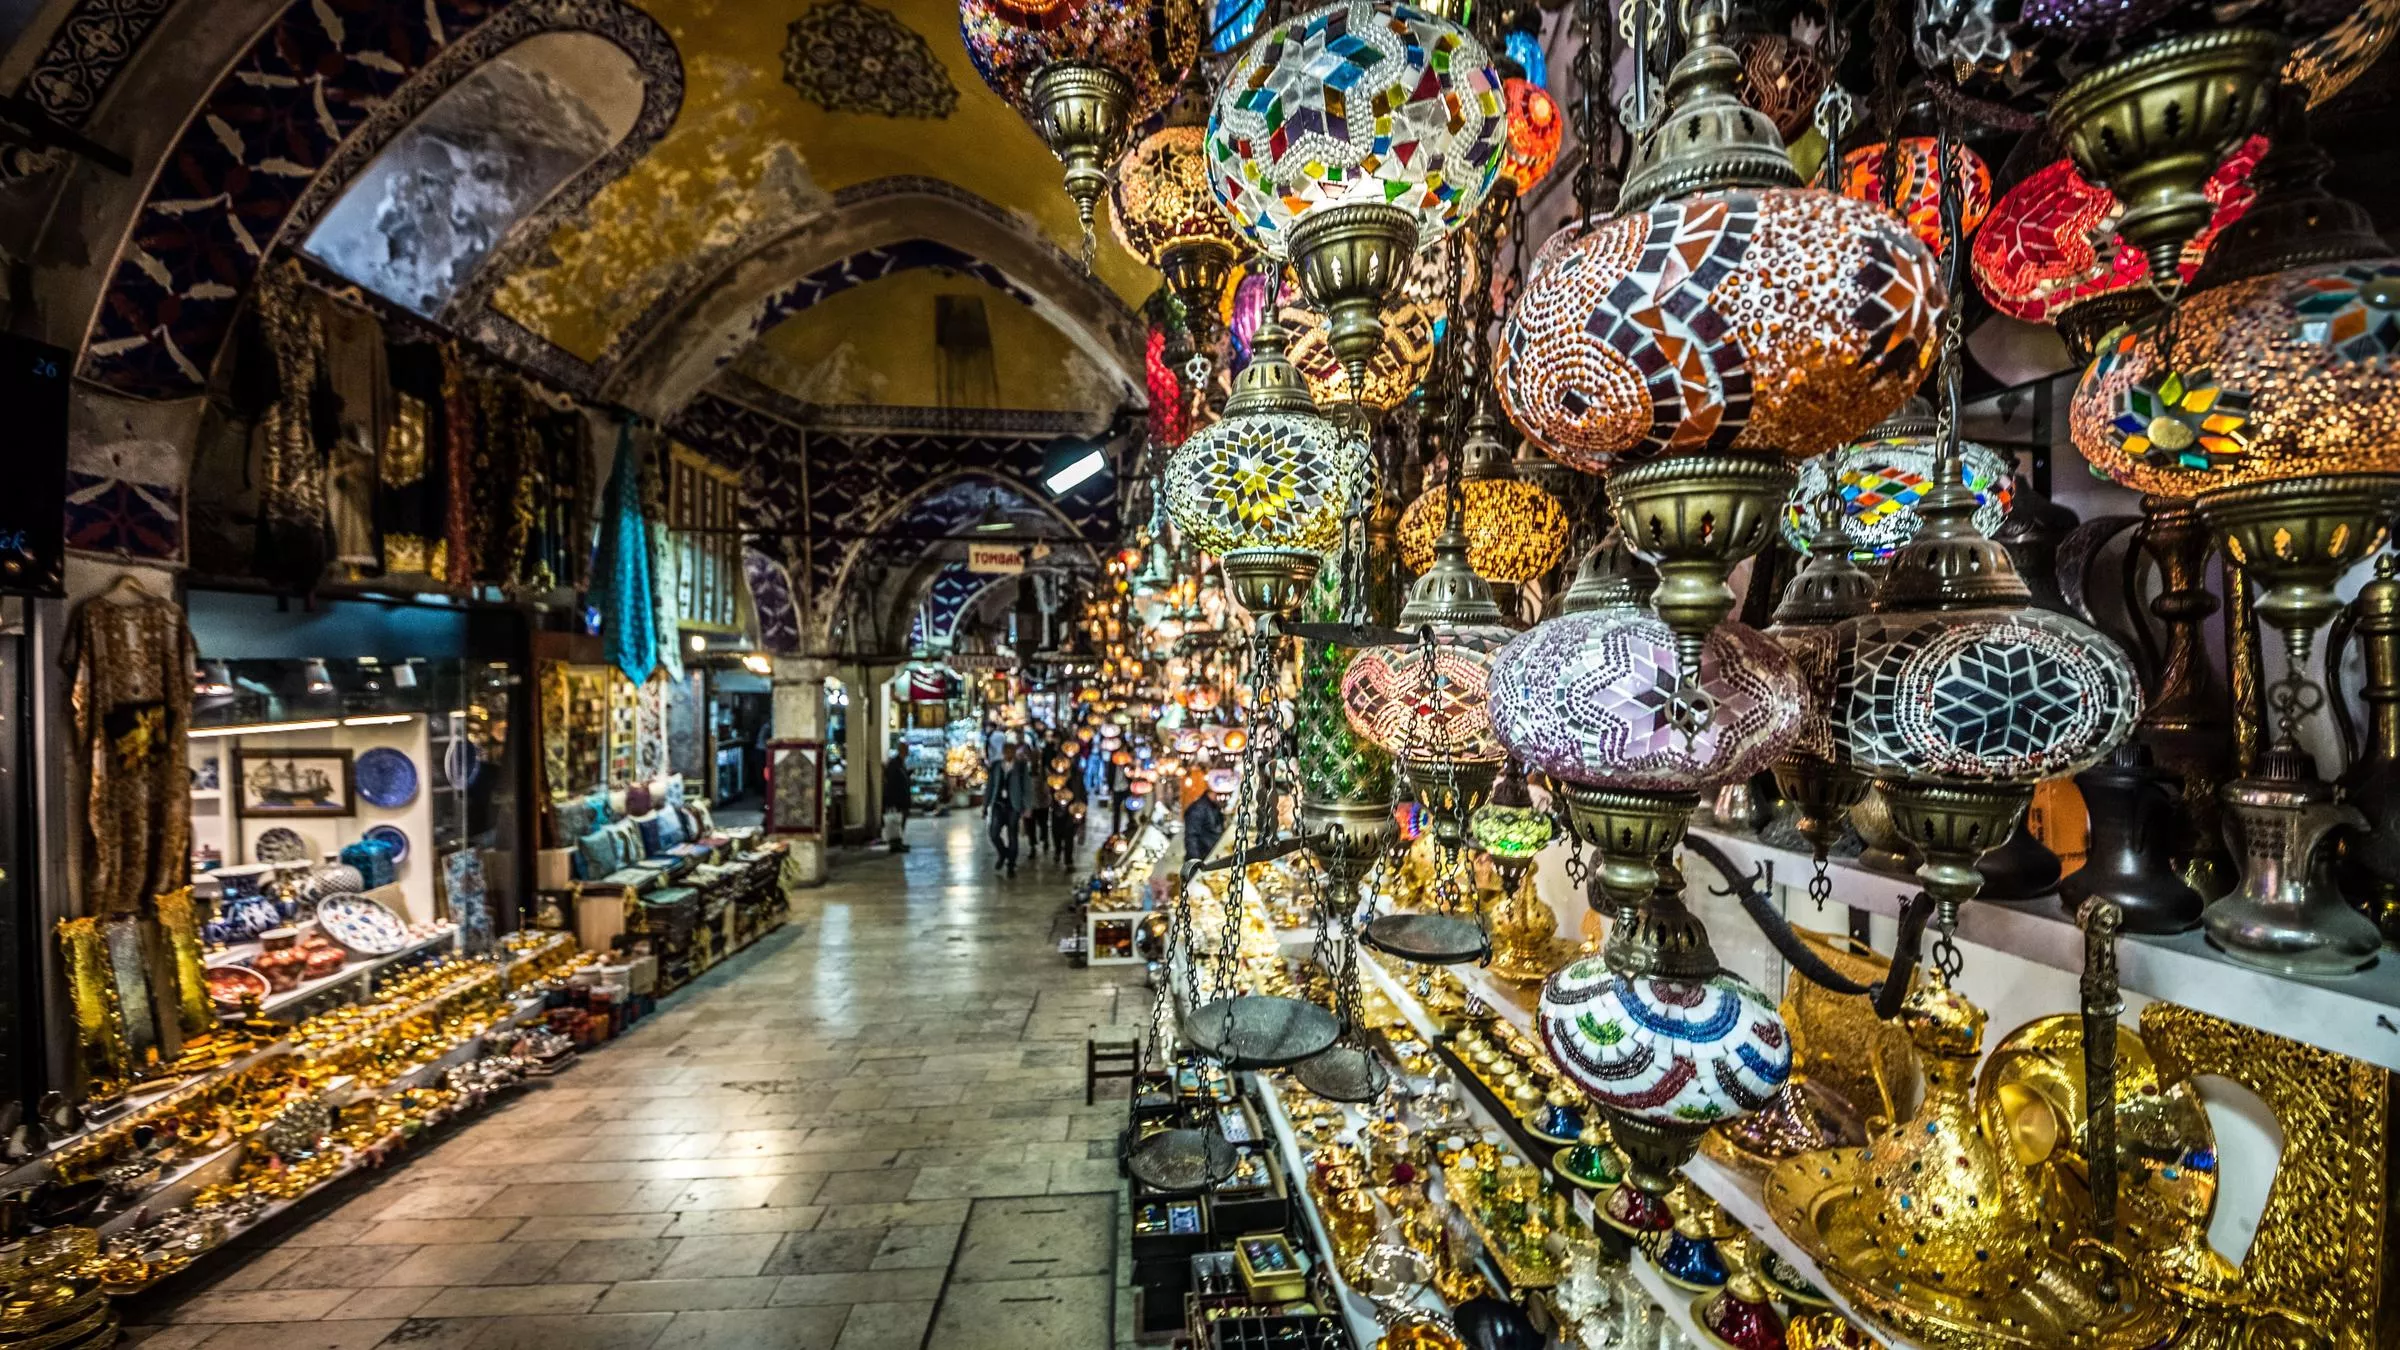 Grand Bazaar in Turkey, central_asia | Handbags,Shoes,Souvenirs,Accessories,Other Crafts,Home Decor - Country Helper